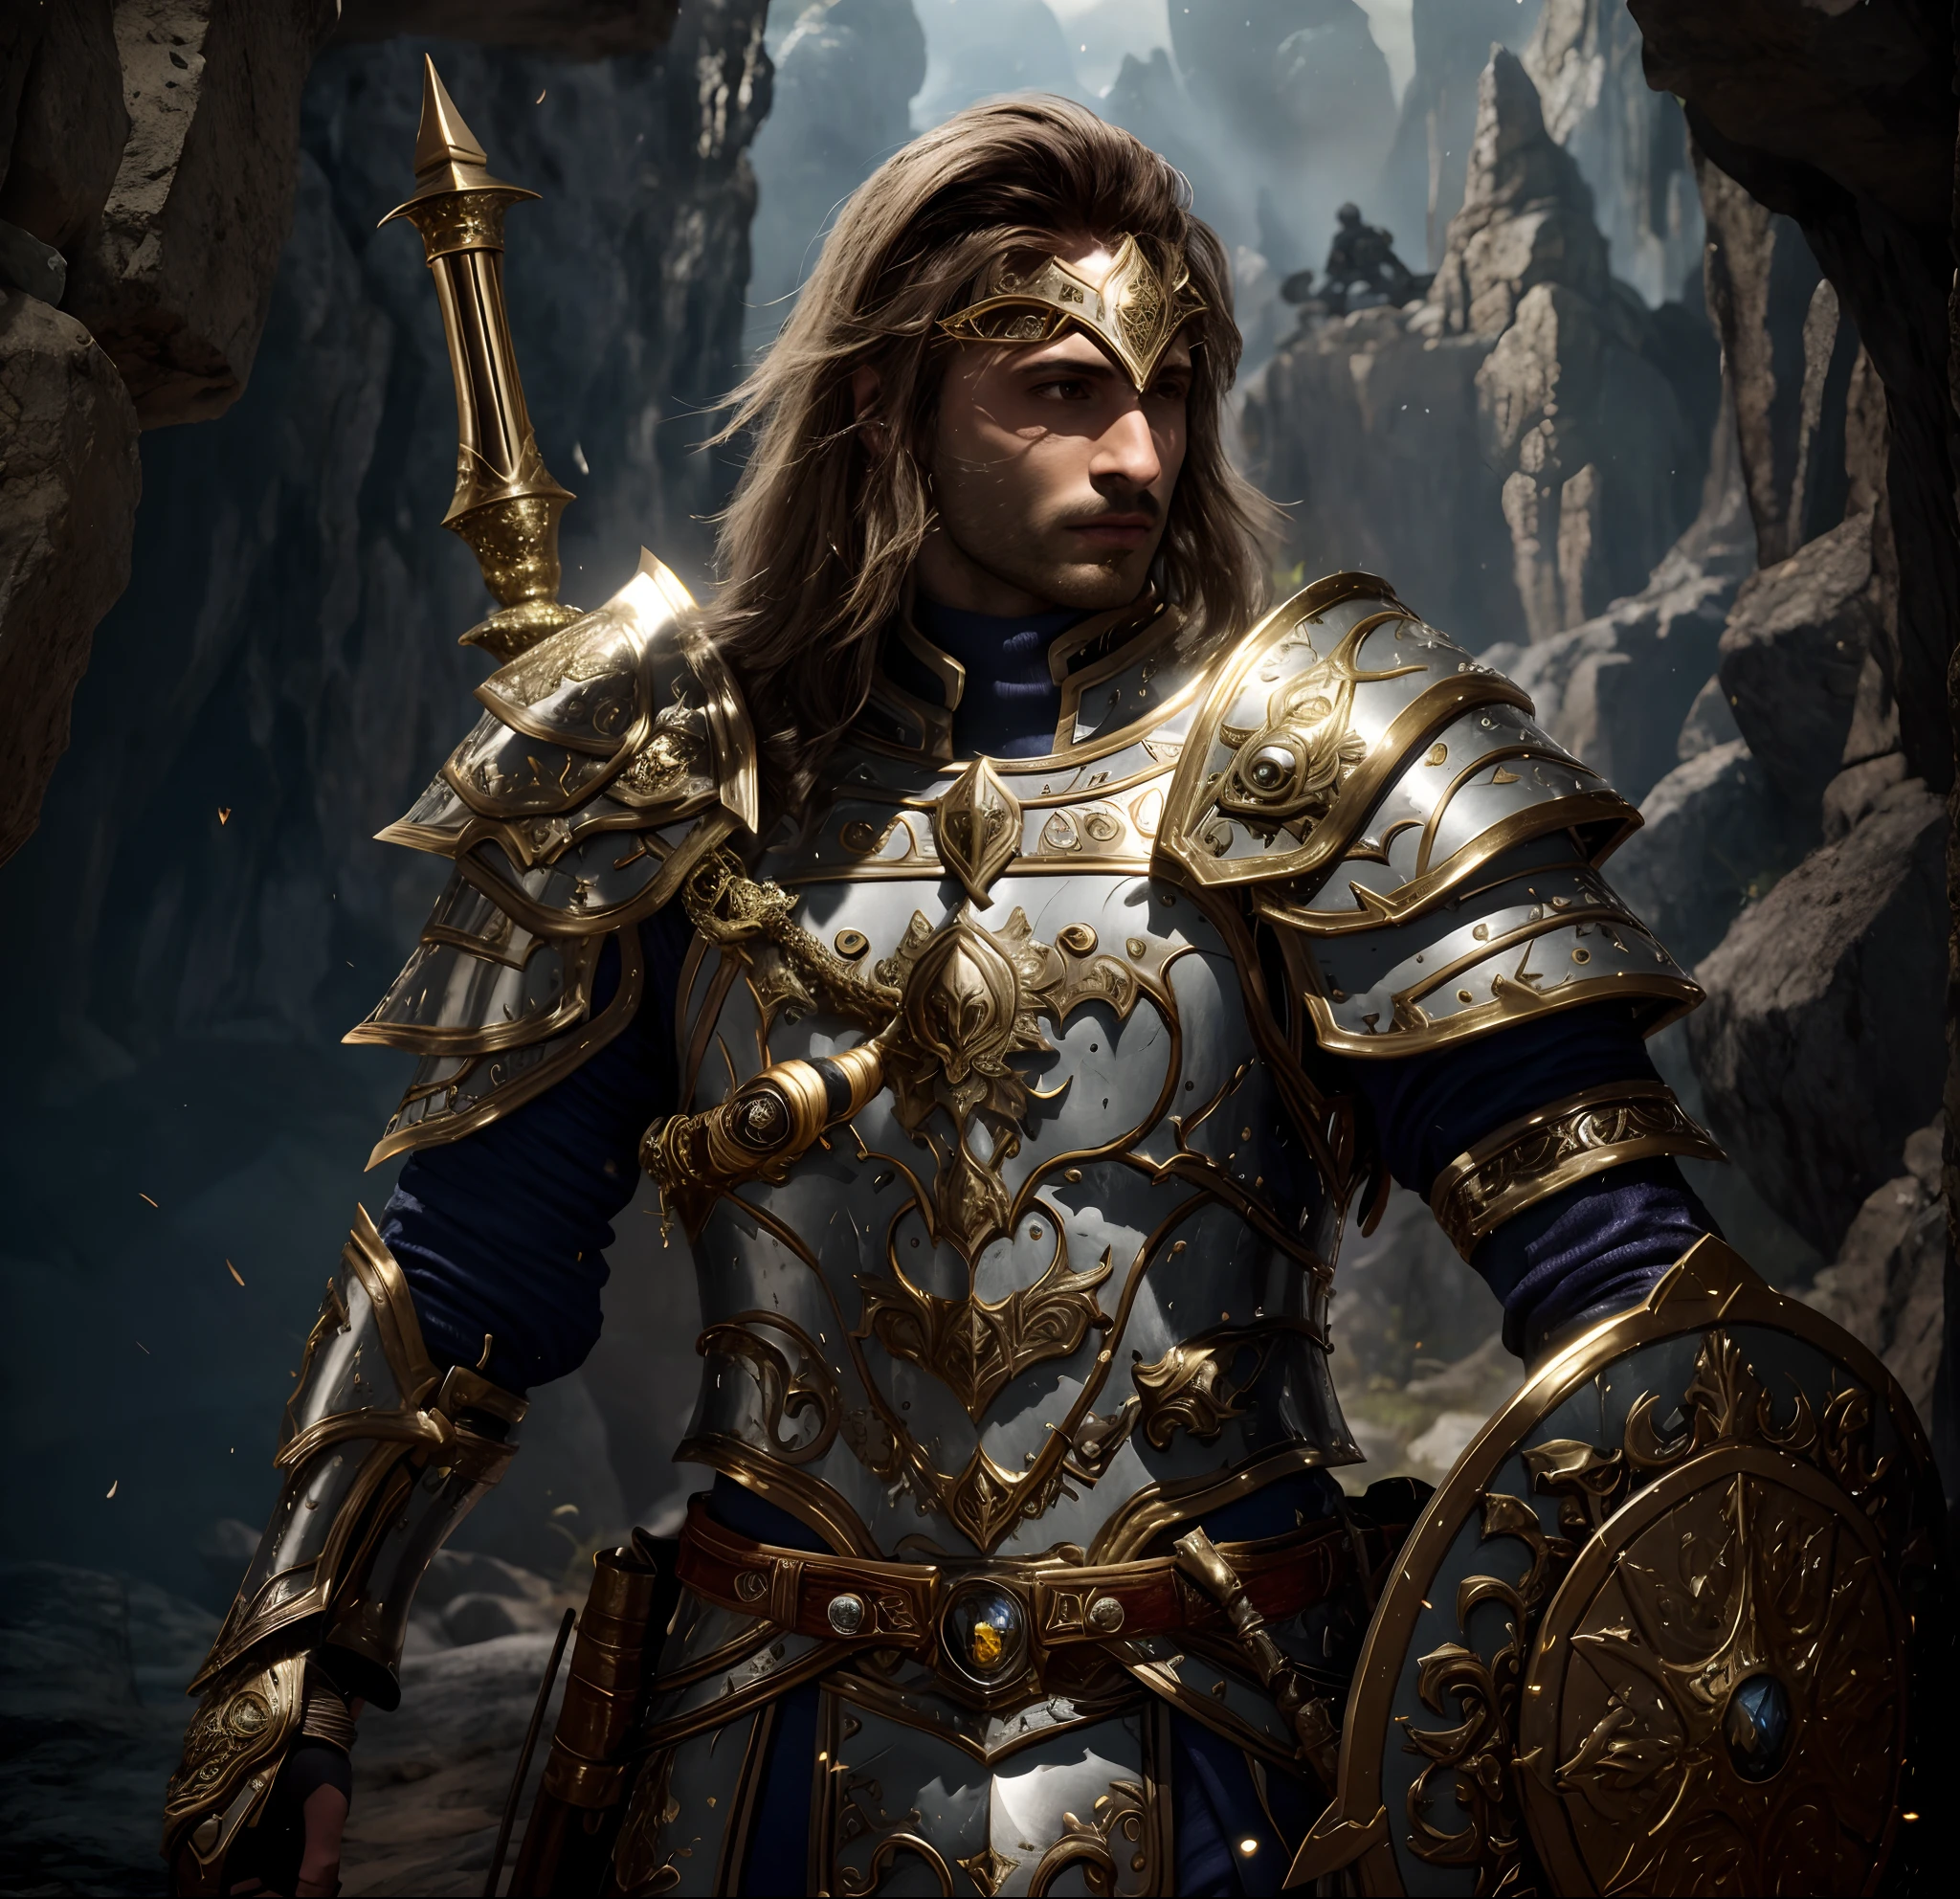 Arafed male in armor standing in a rocky area with a sword, fantasy paladin, male paladin, 4 k detail fantasy, paladin golden armor, fantasy warrior in full armor, arsen lupin as a paladin, 4k fantasy artwork, elegant cinematic fantasy art, epic paladin armor, gold heavy armor. Dramatic